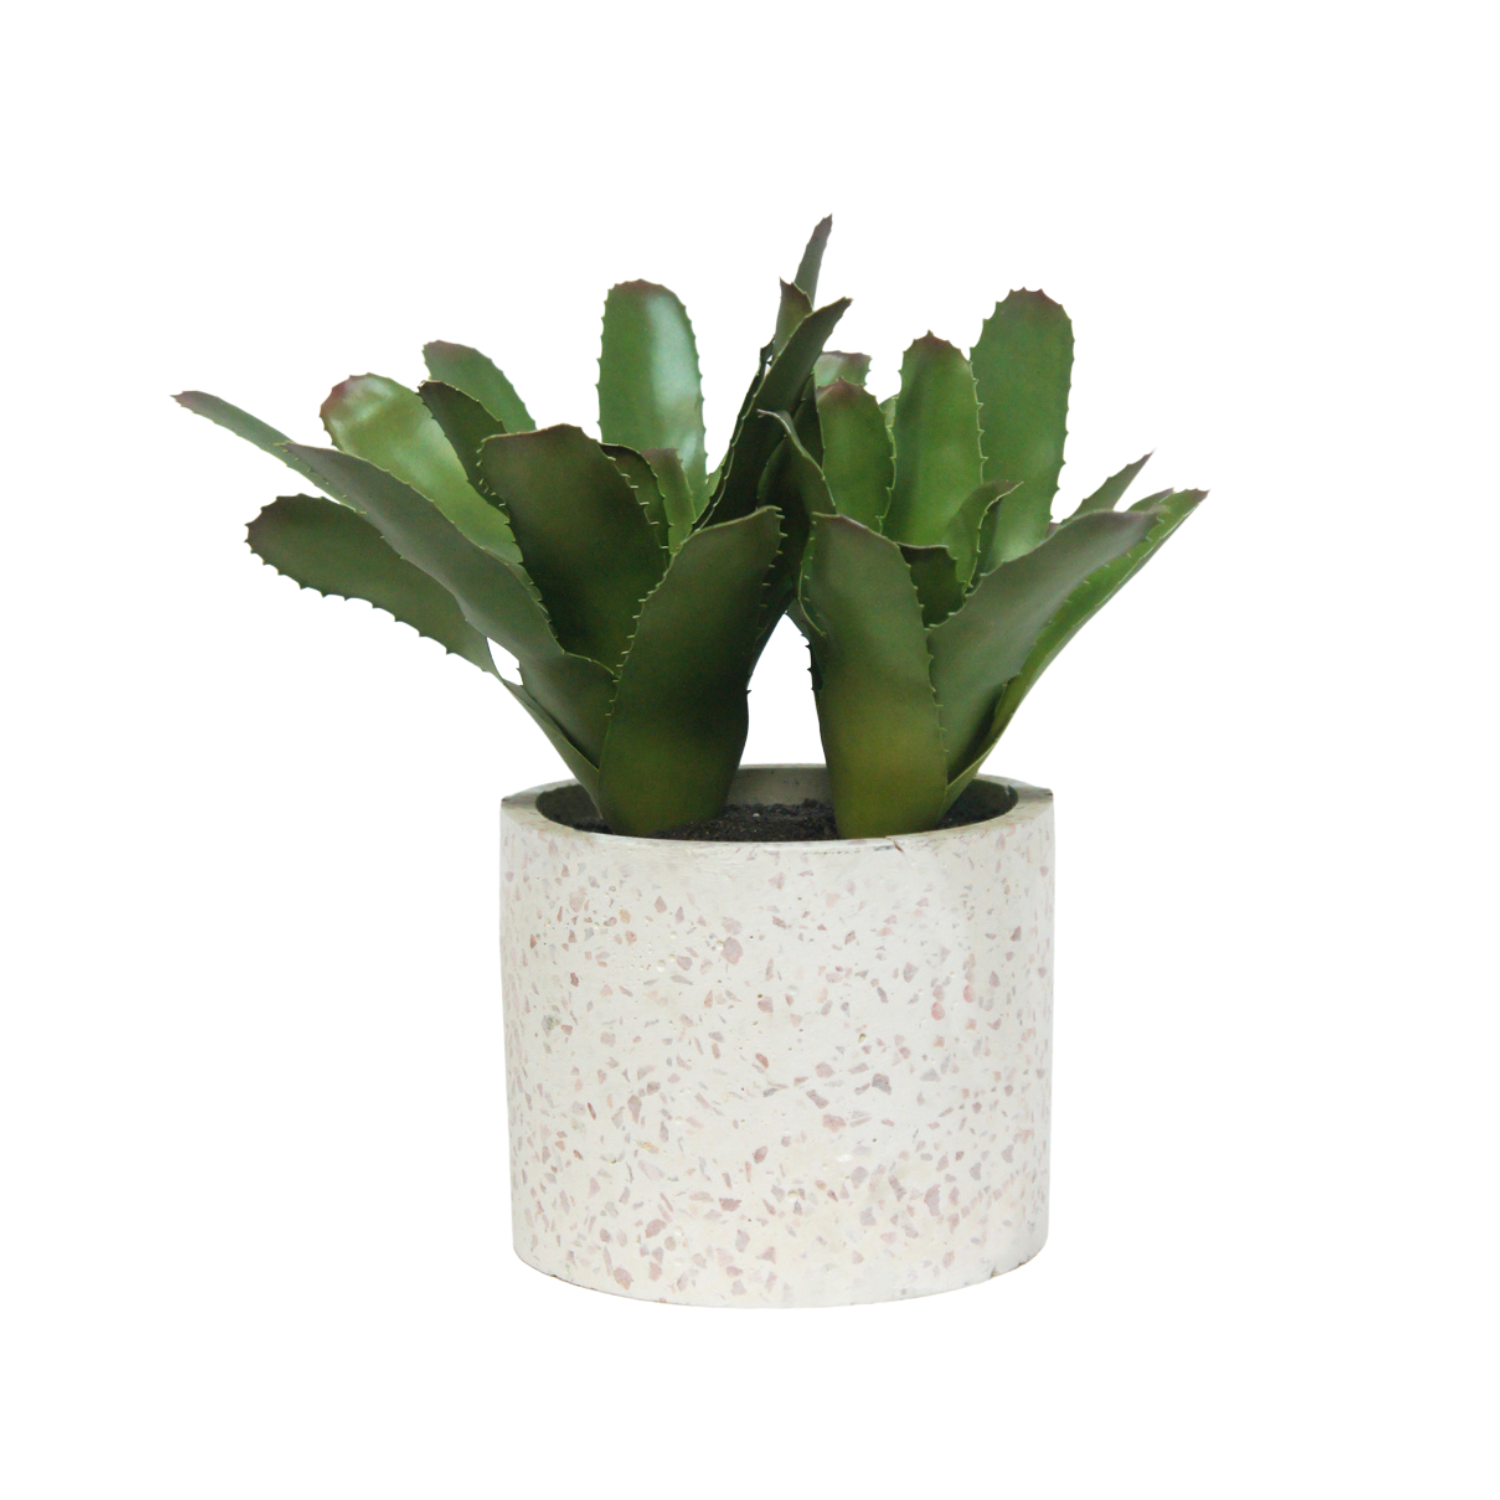 1pce 27x14cm Bromelioideae with Terrazzo Pot Artificial Plant Greenery Great Table Decor